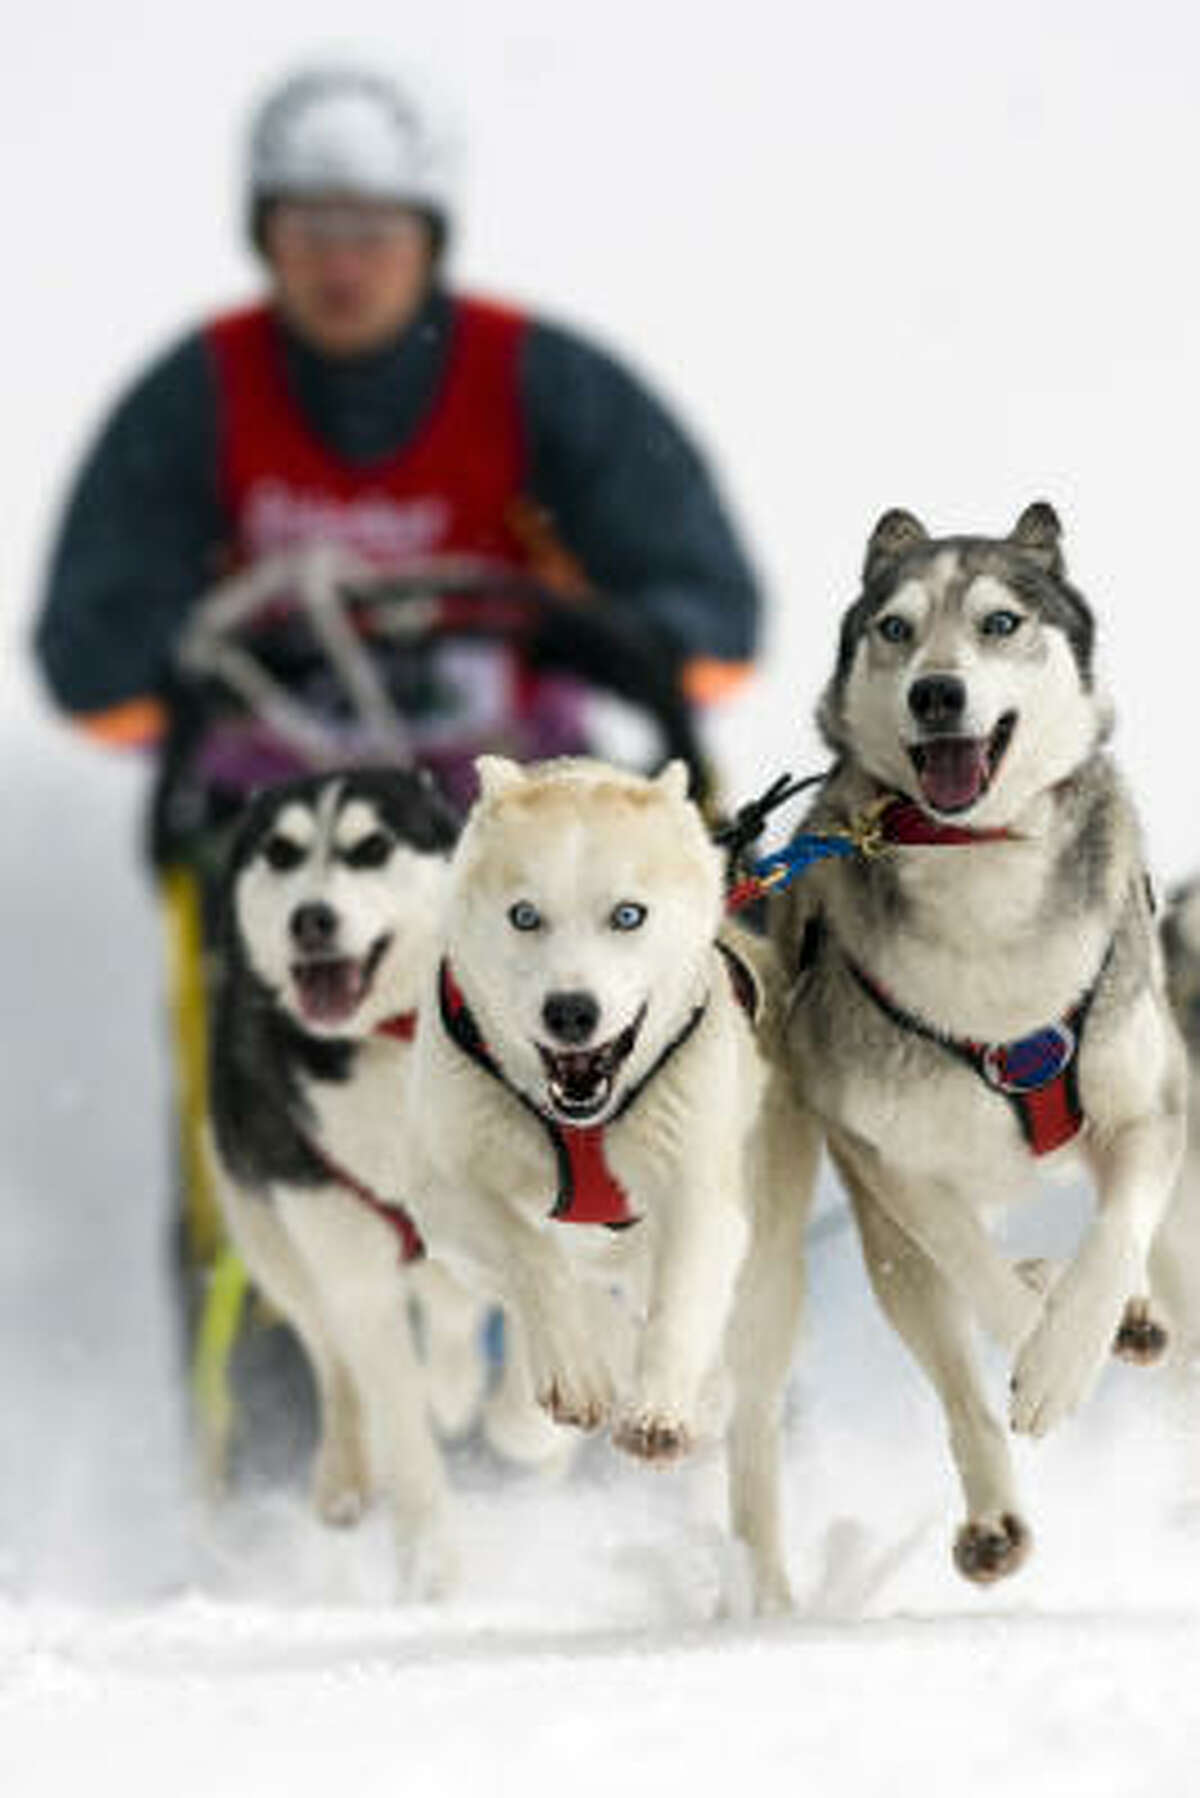 A musher an his dog-sled team compete during the 18th dog sledding in Benneckenstein, Germany.